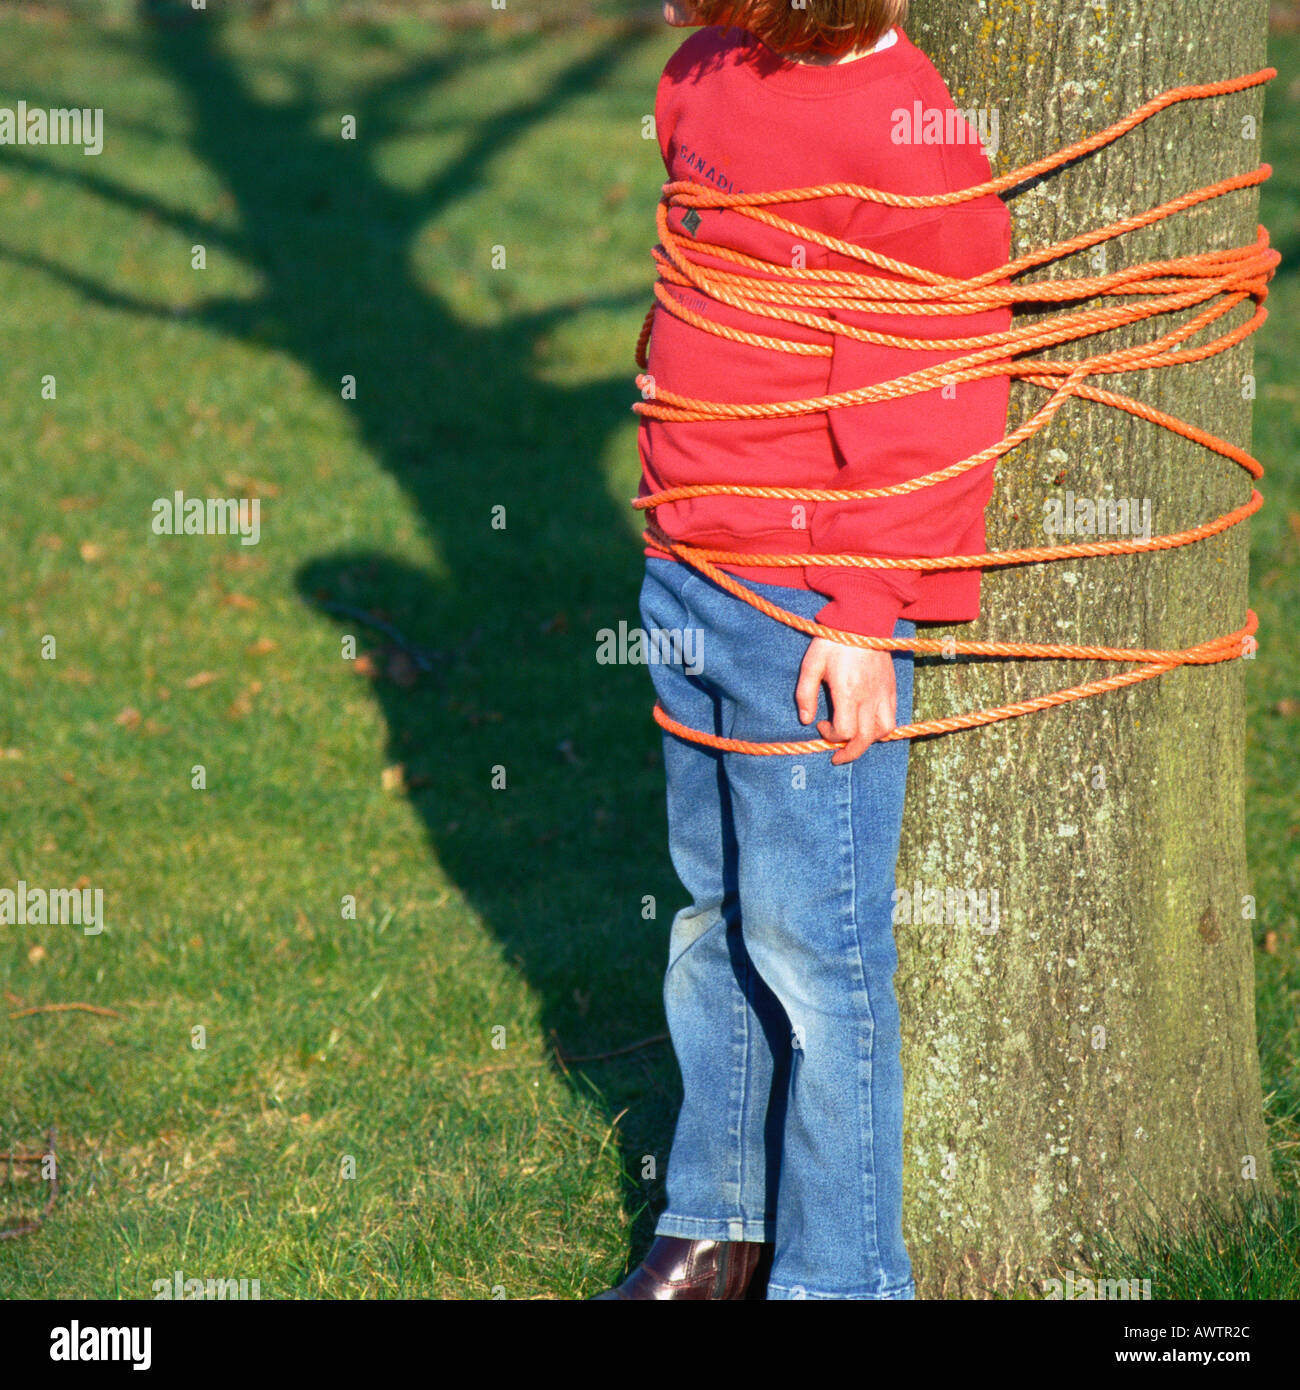 Child tied to tree, cropped Stock Photo - Alamy